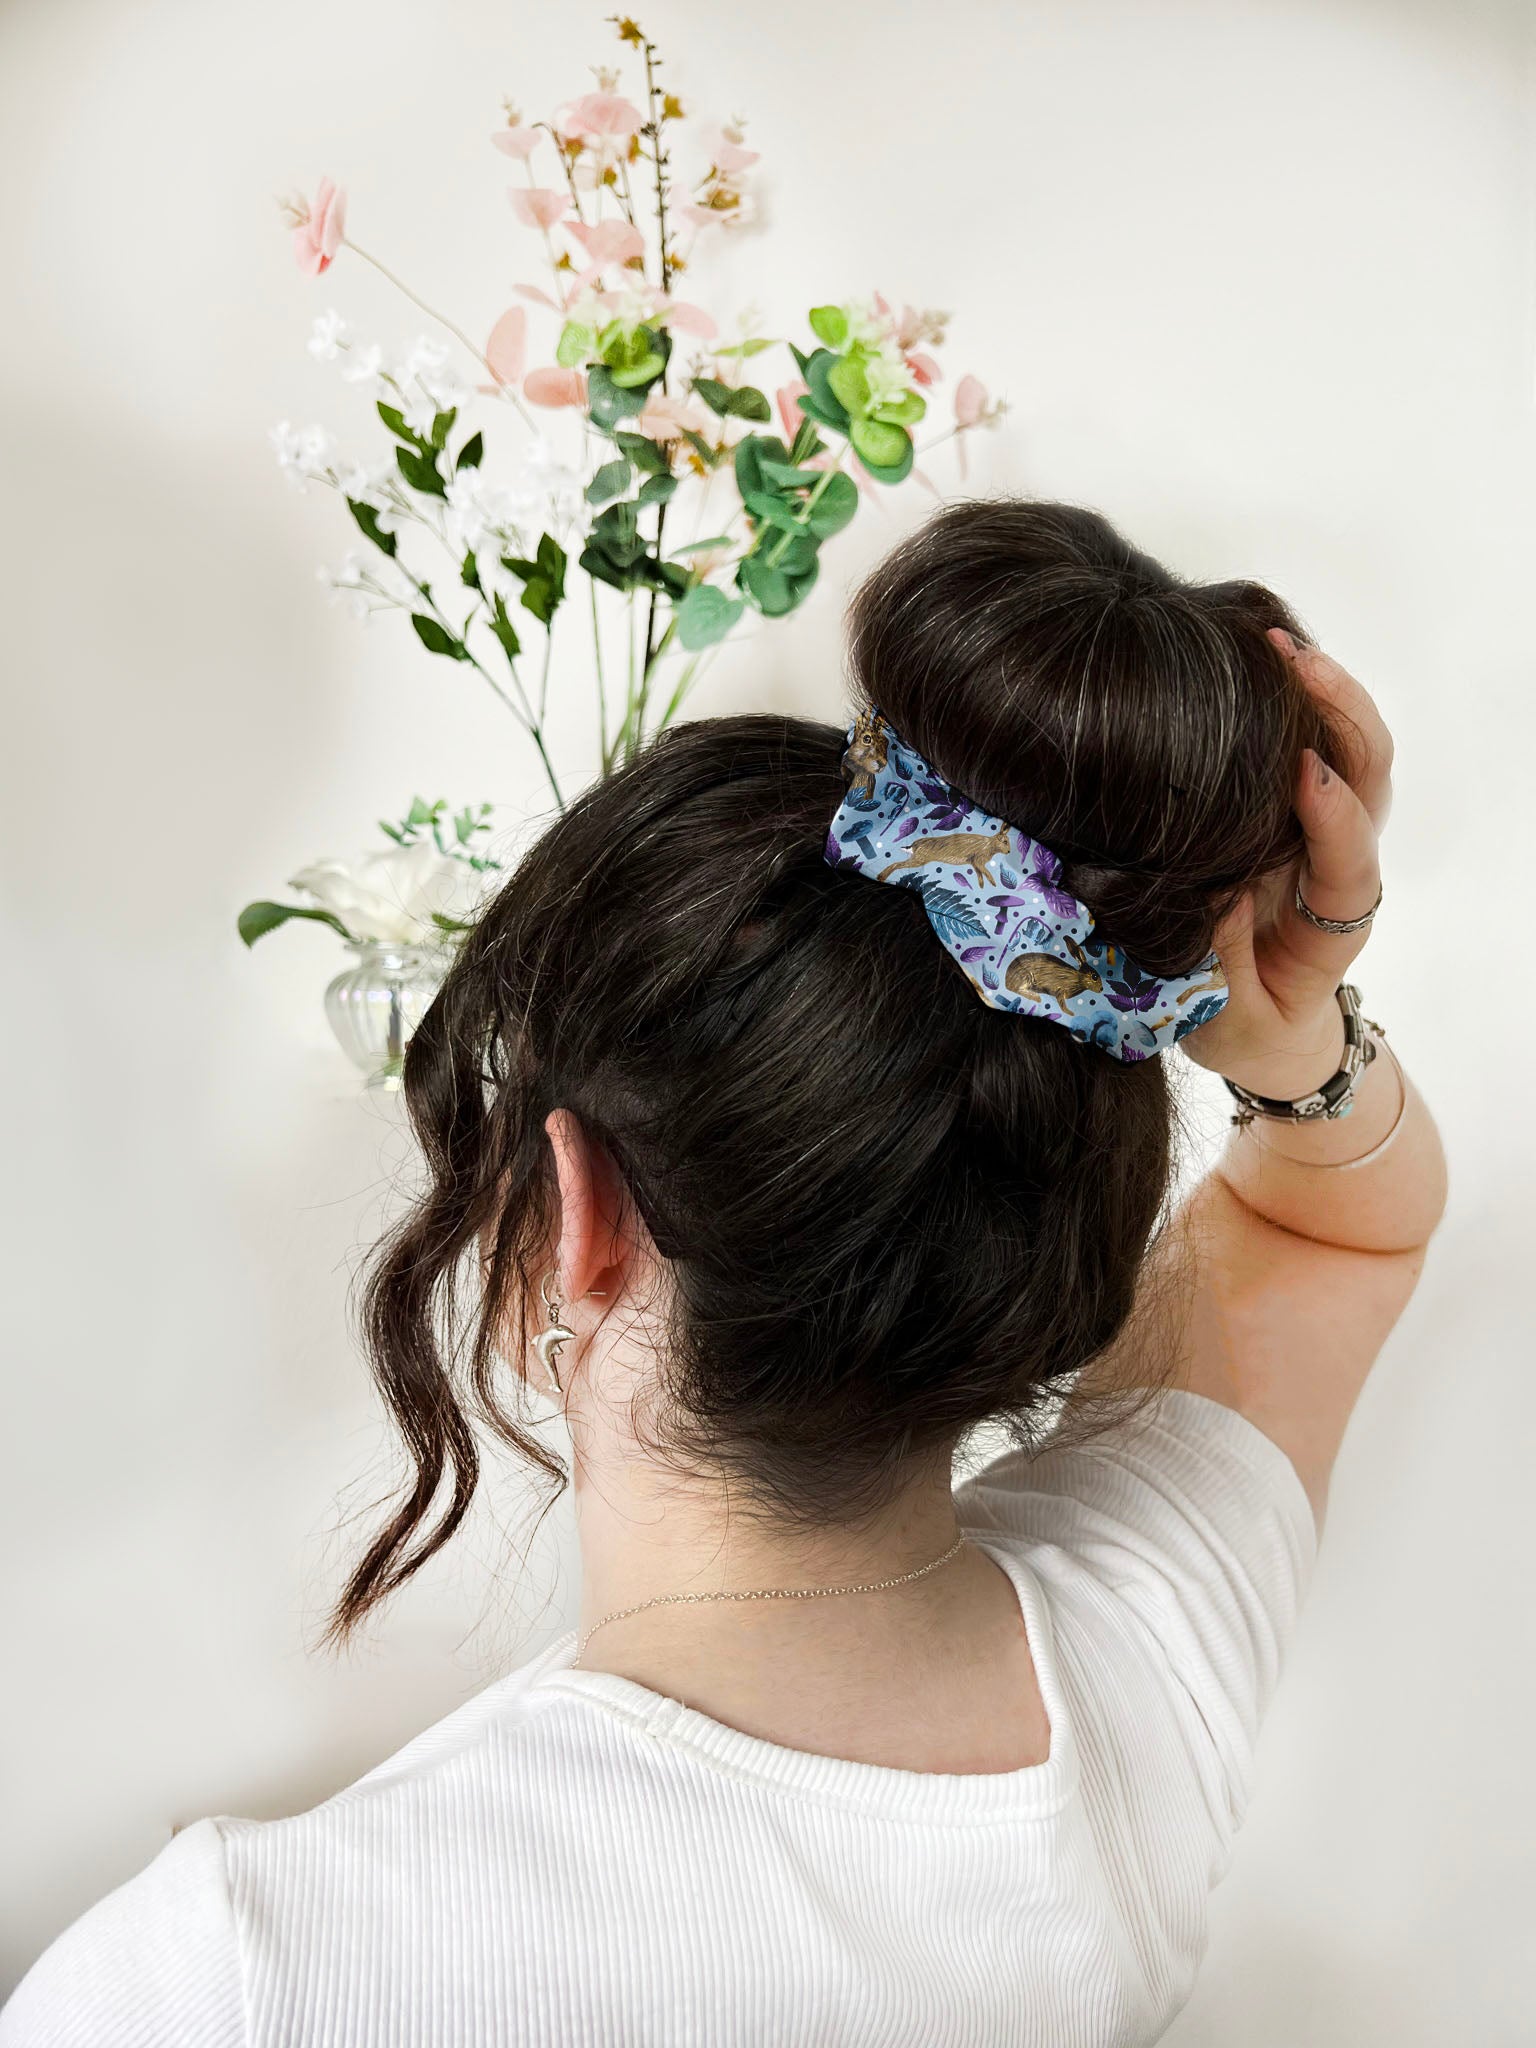 Dark haired girl photographed with a high bun, with a blue and purple patterned scrunchie holding it up.